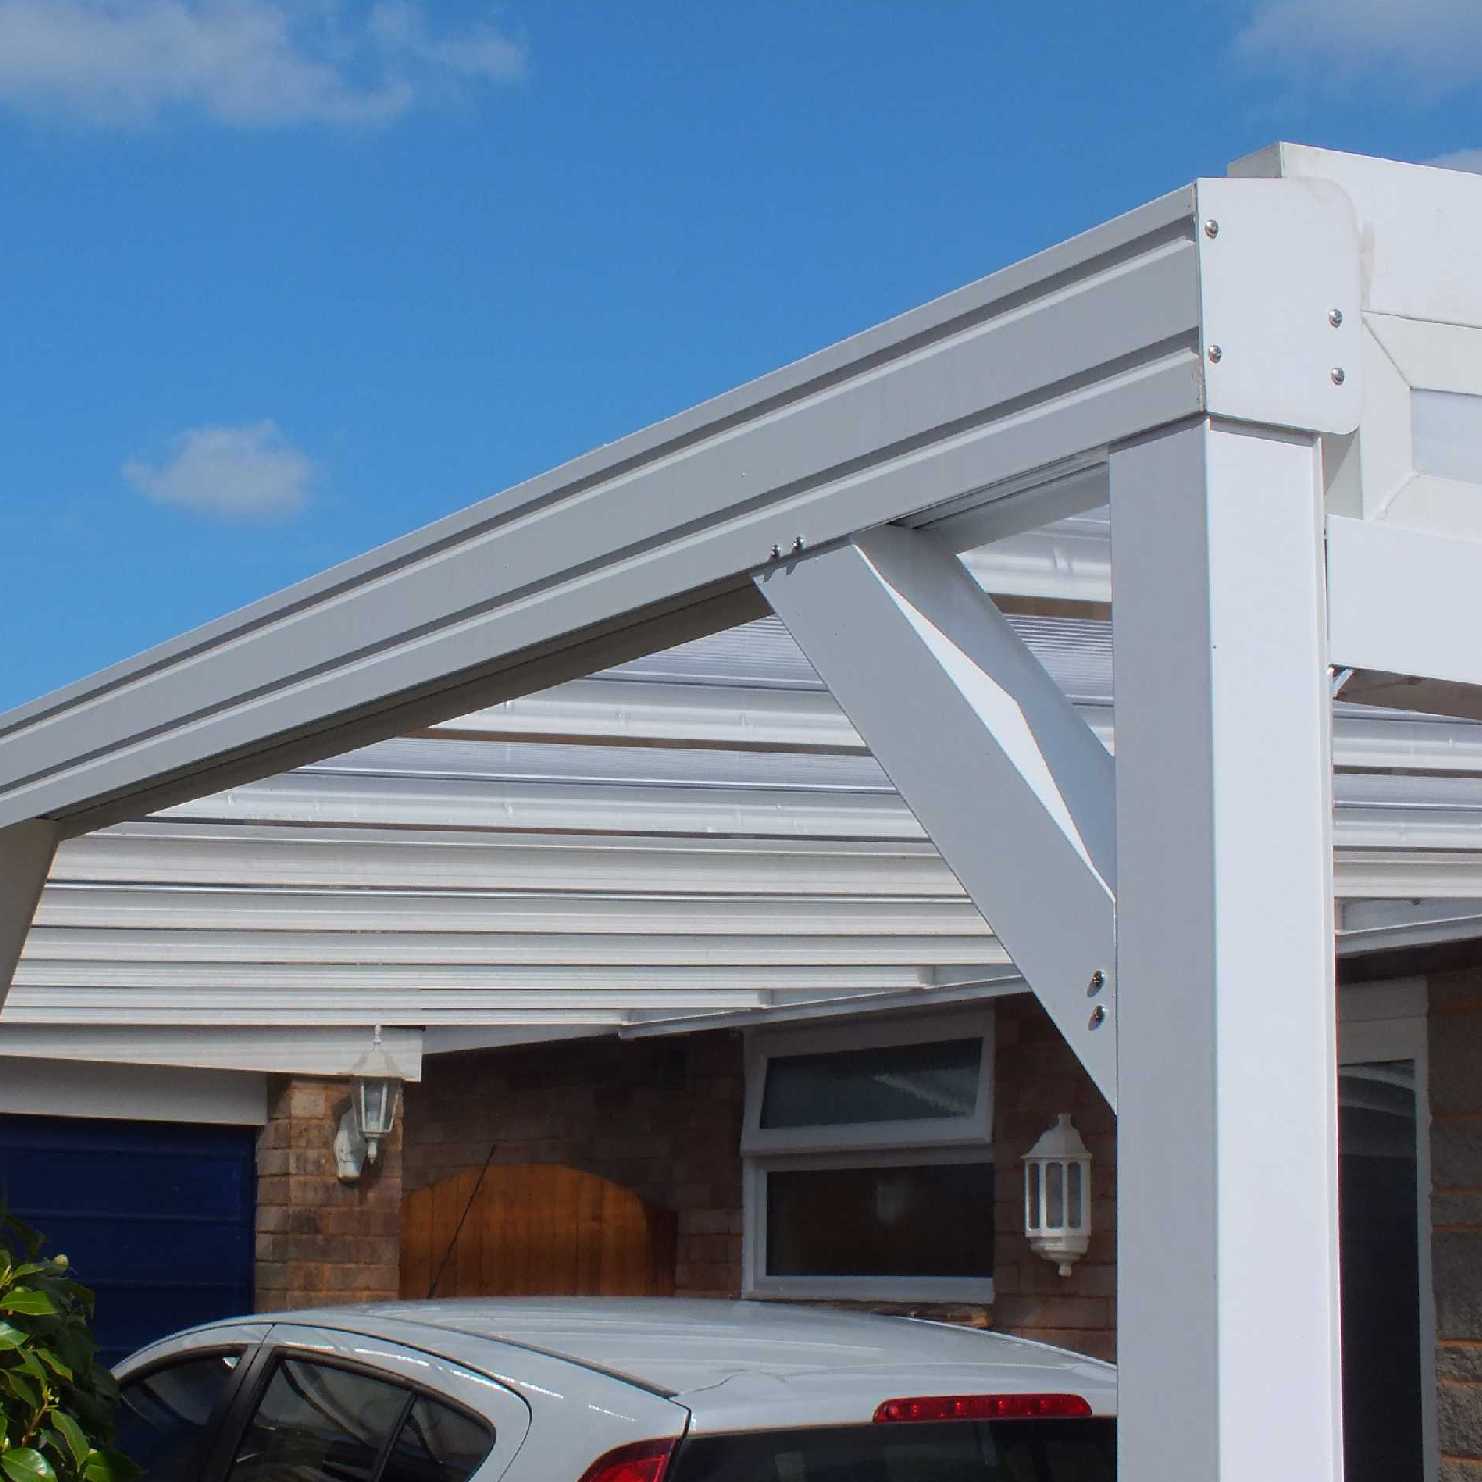 Buy Omega Smart Lean-To Canopy, White with 16mm Polycarbonate Glazing - 2.1m (W) x 4.0m (P), (2) Supporting Posts online today